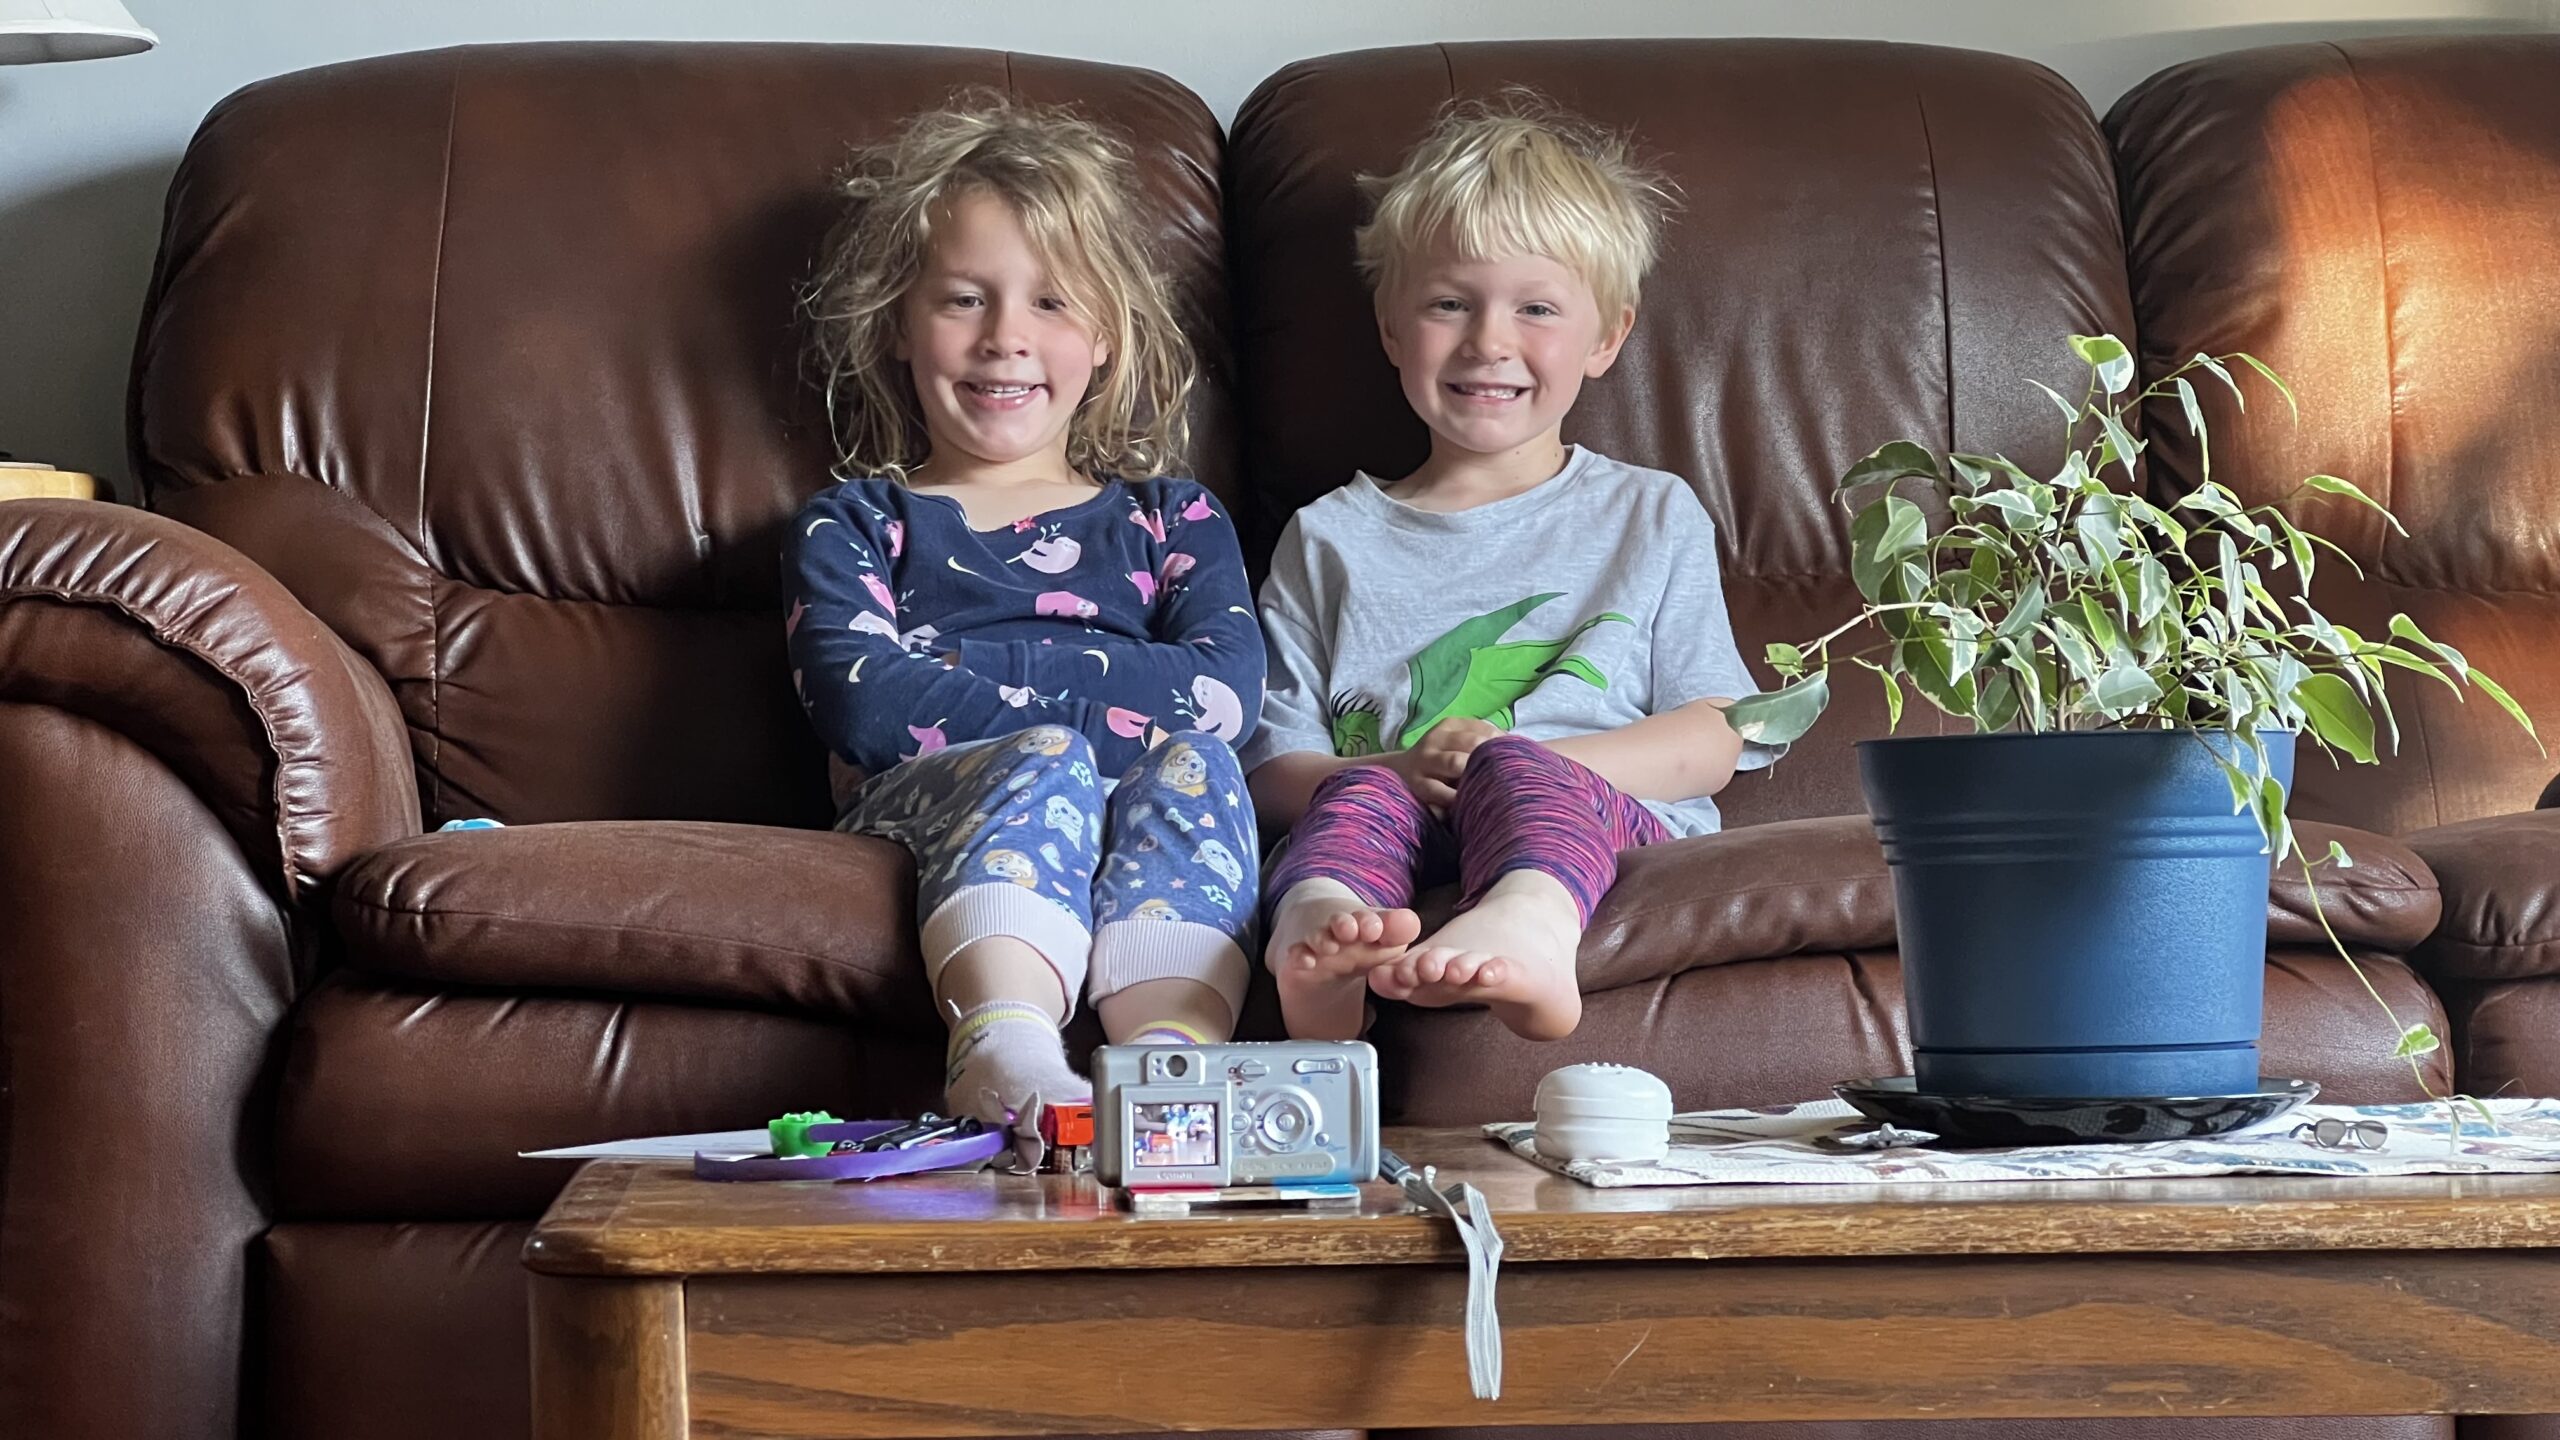 Two young children sit on a sofa with a digital camera set up on self timer mode takes their photo.